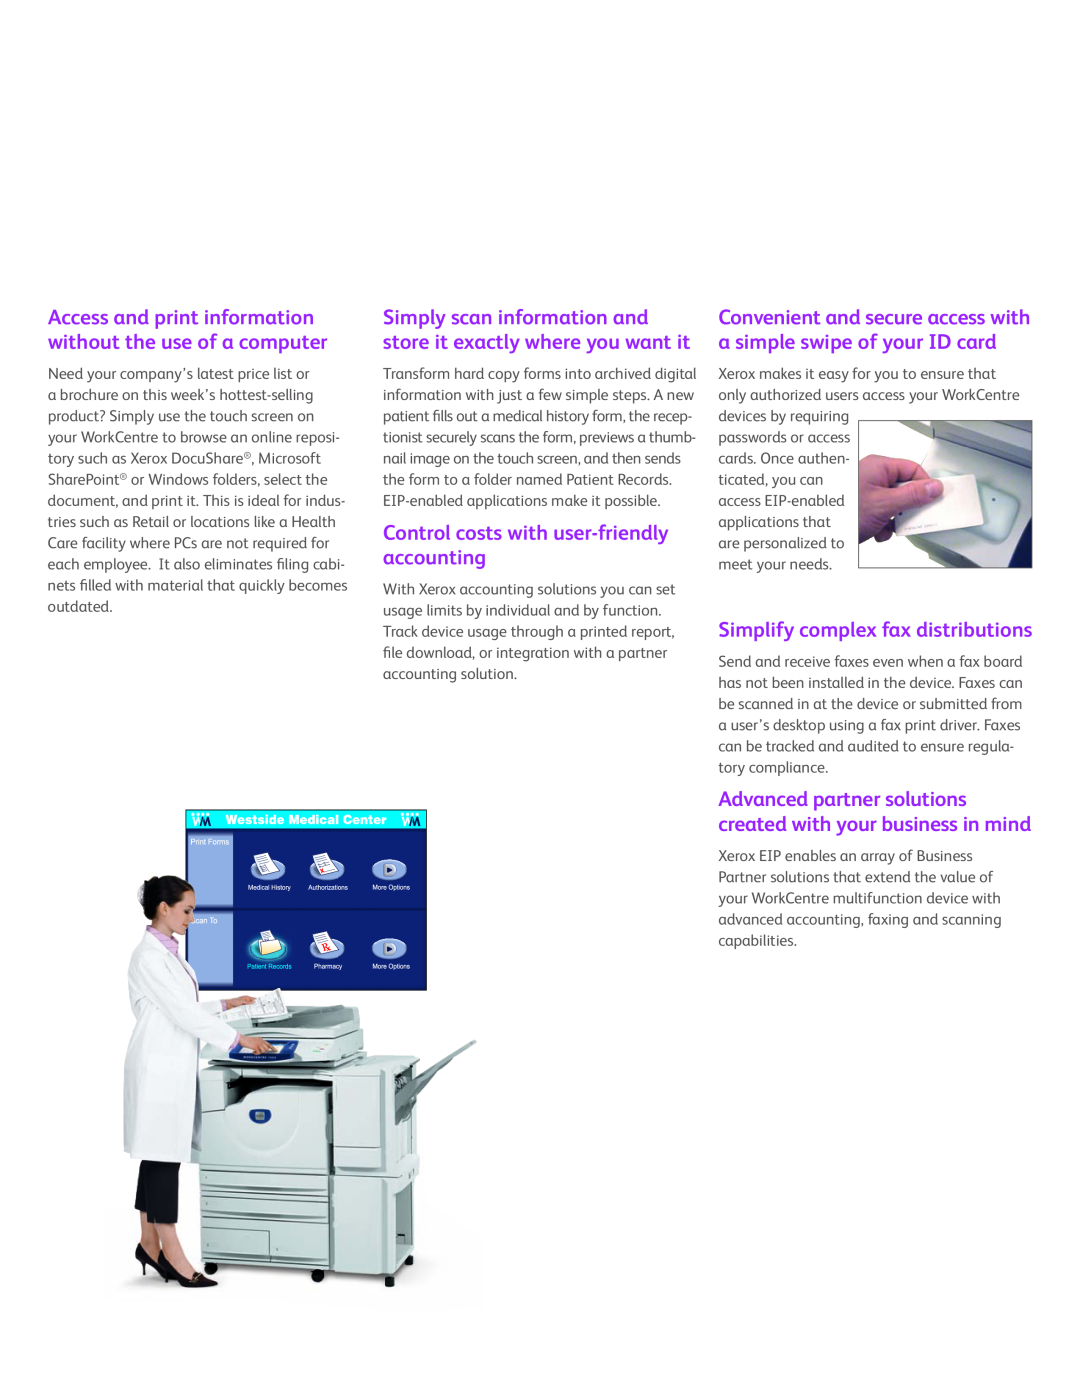 Xerox TV2802UK manual Control costs with user-friendlyaccounting, Simplify complex fax distributions 